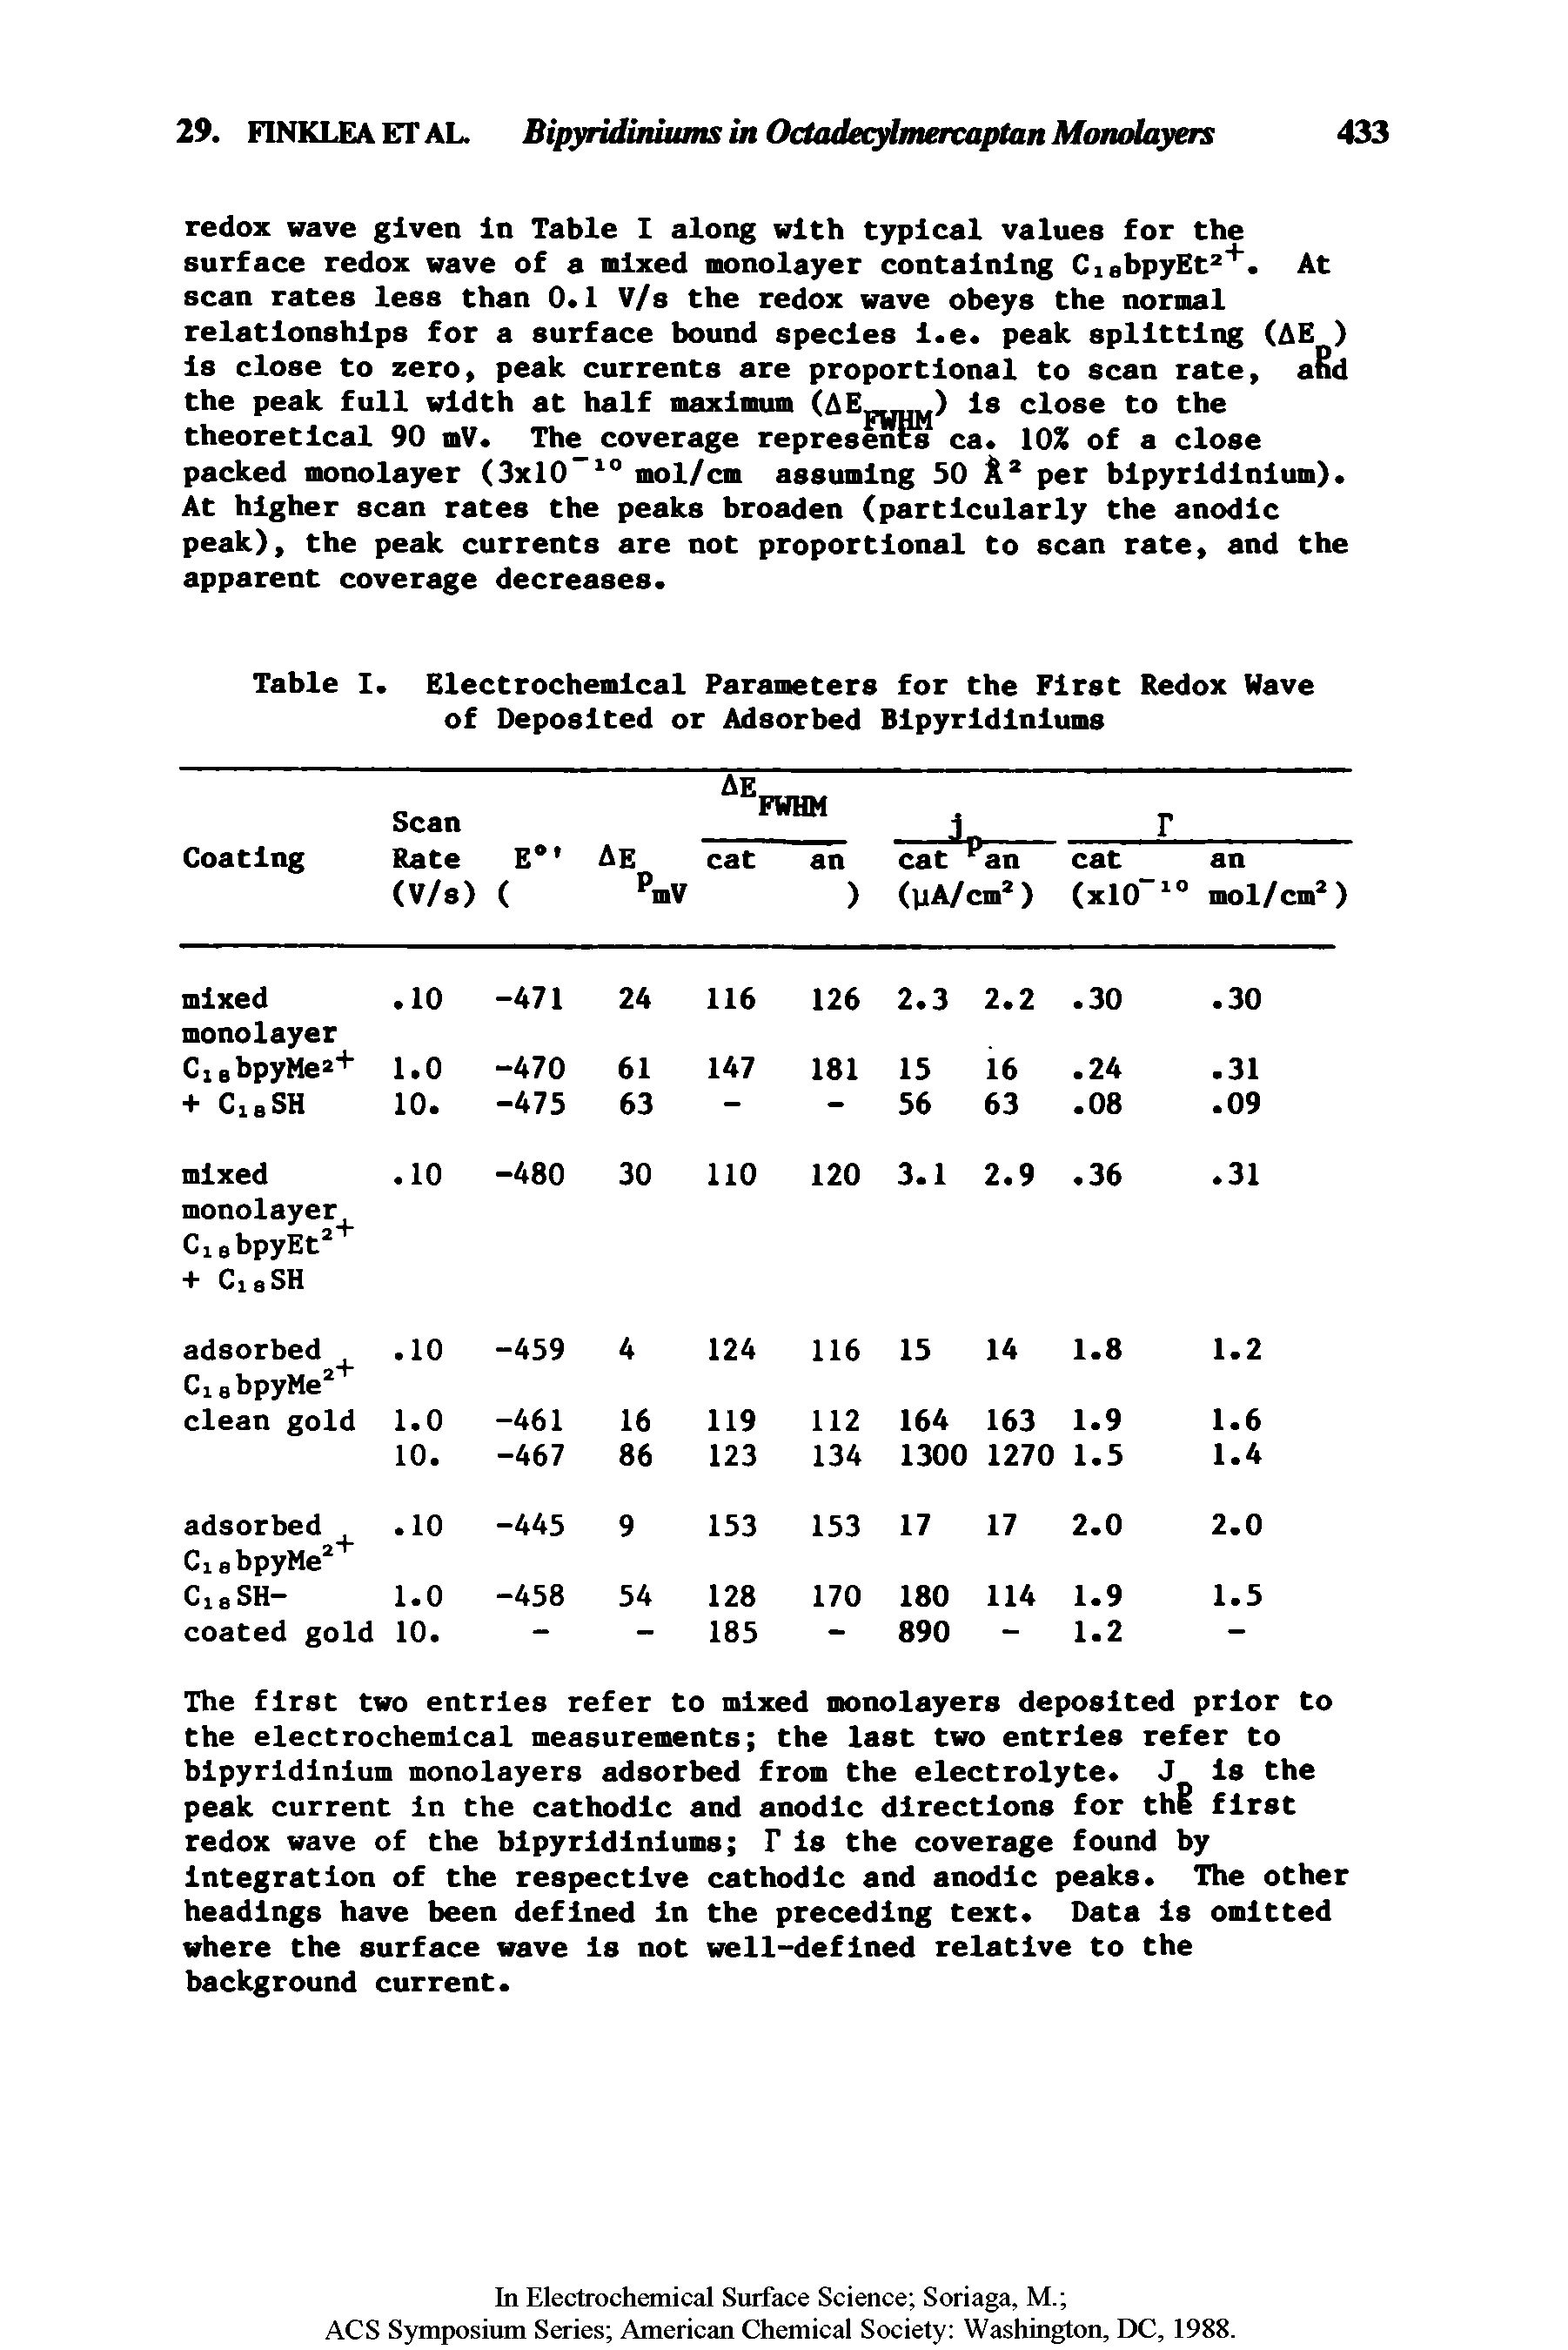 Table I. Electrochemical Parameters for the First Redox Have of Deposited or Adsorbed Bipyridiniums...